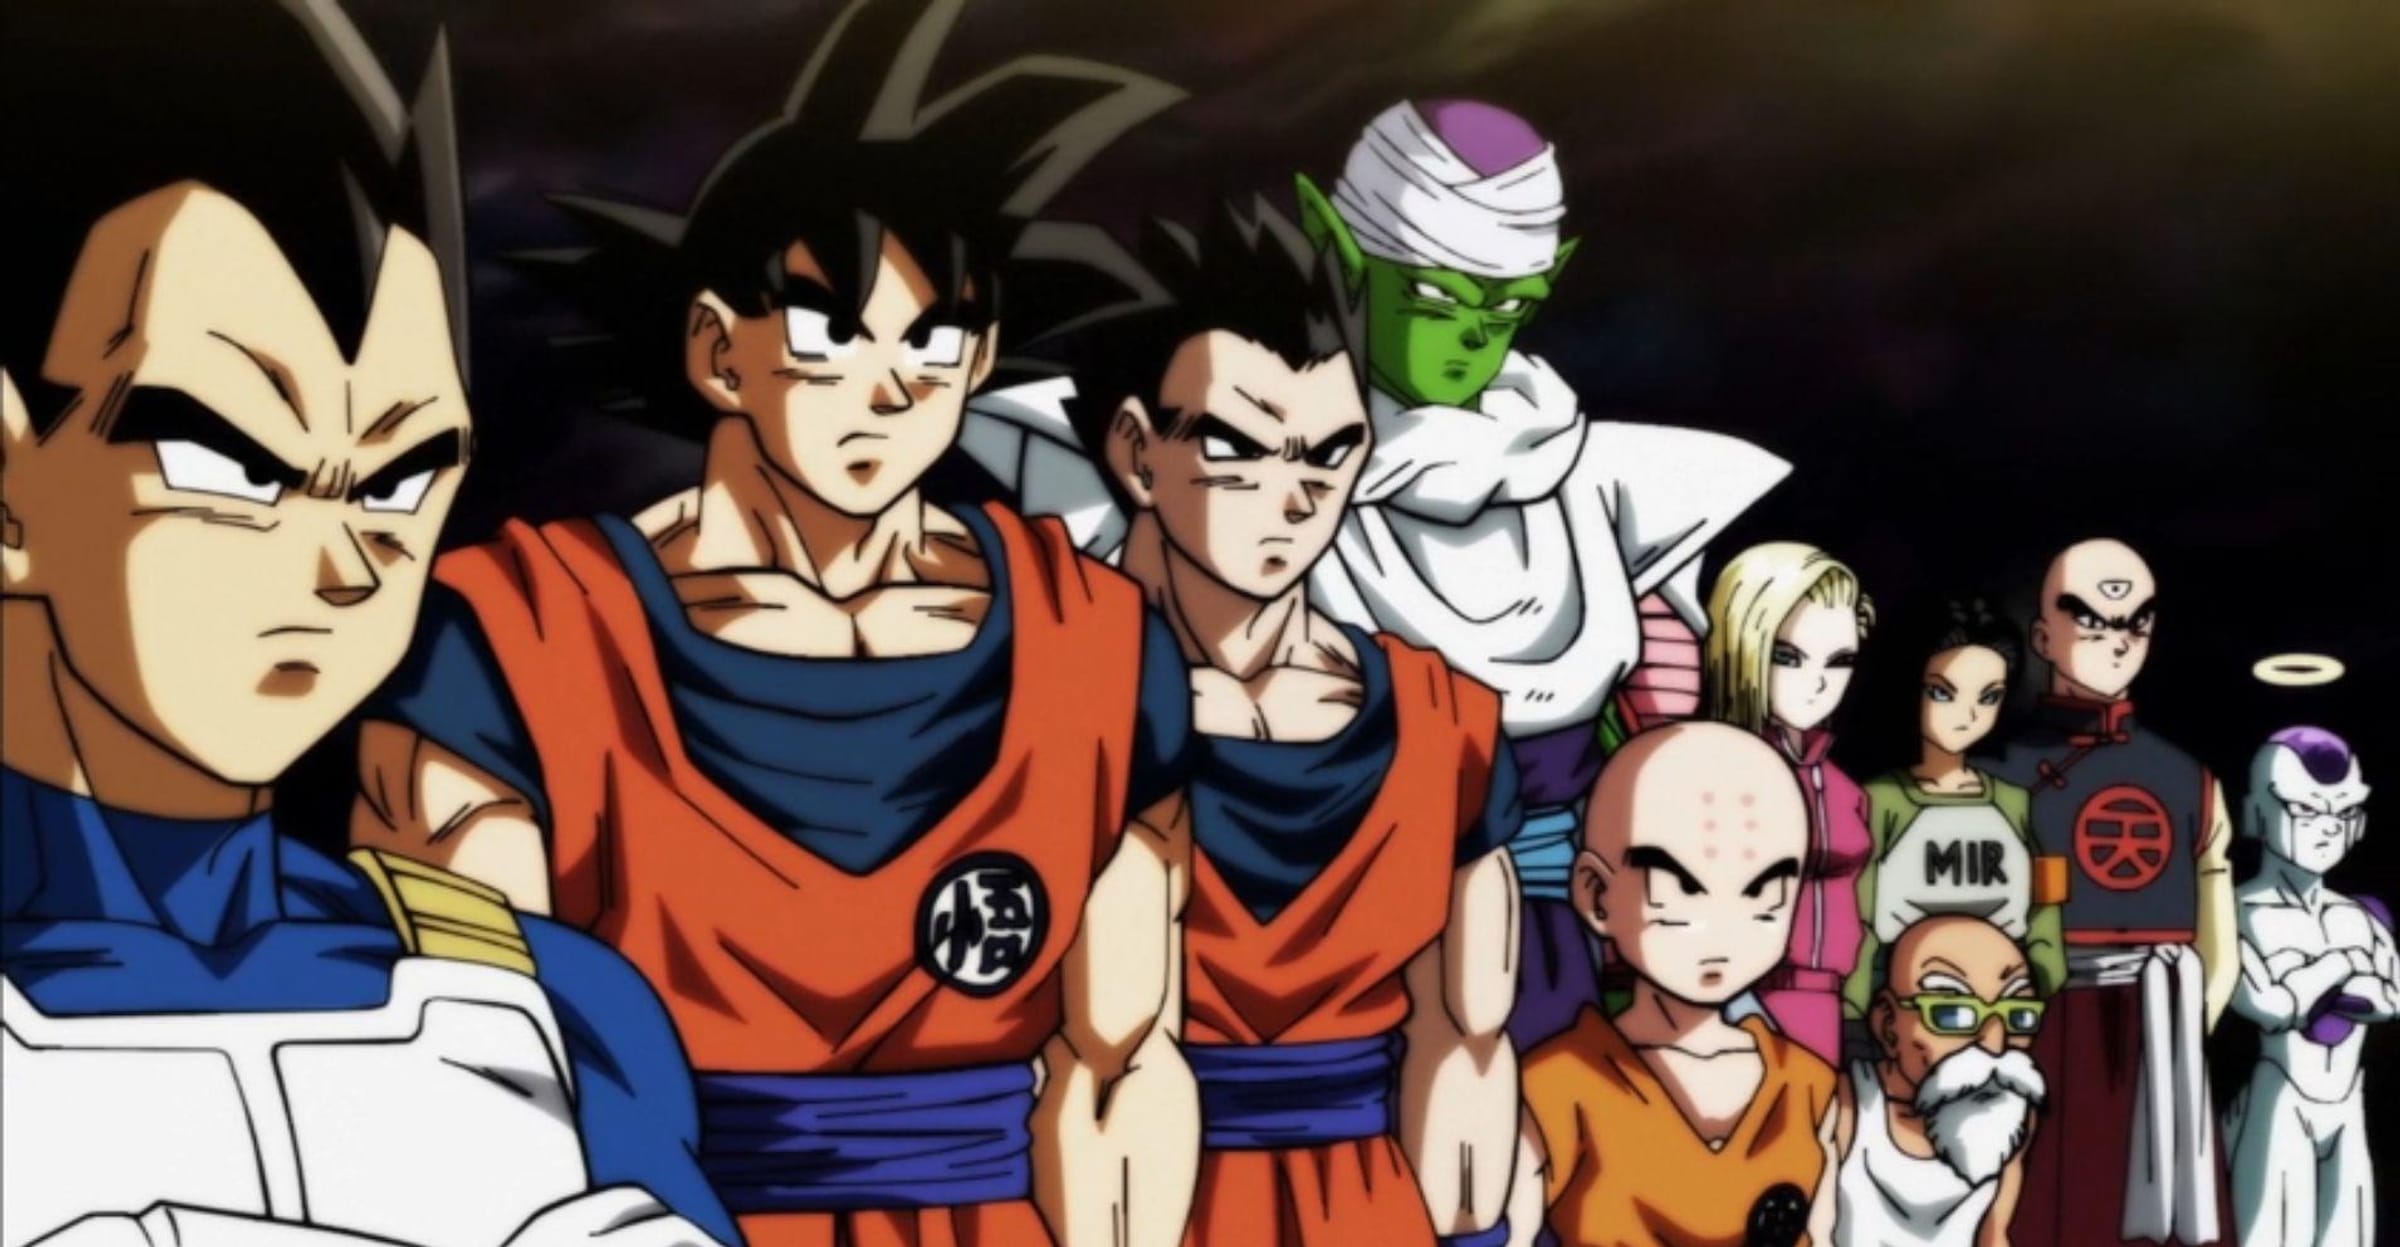 Dragon Ball Super Reveals A Forgotten Fighter With The Power Of A God